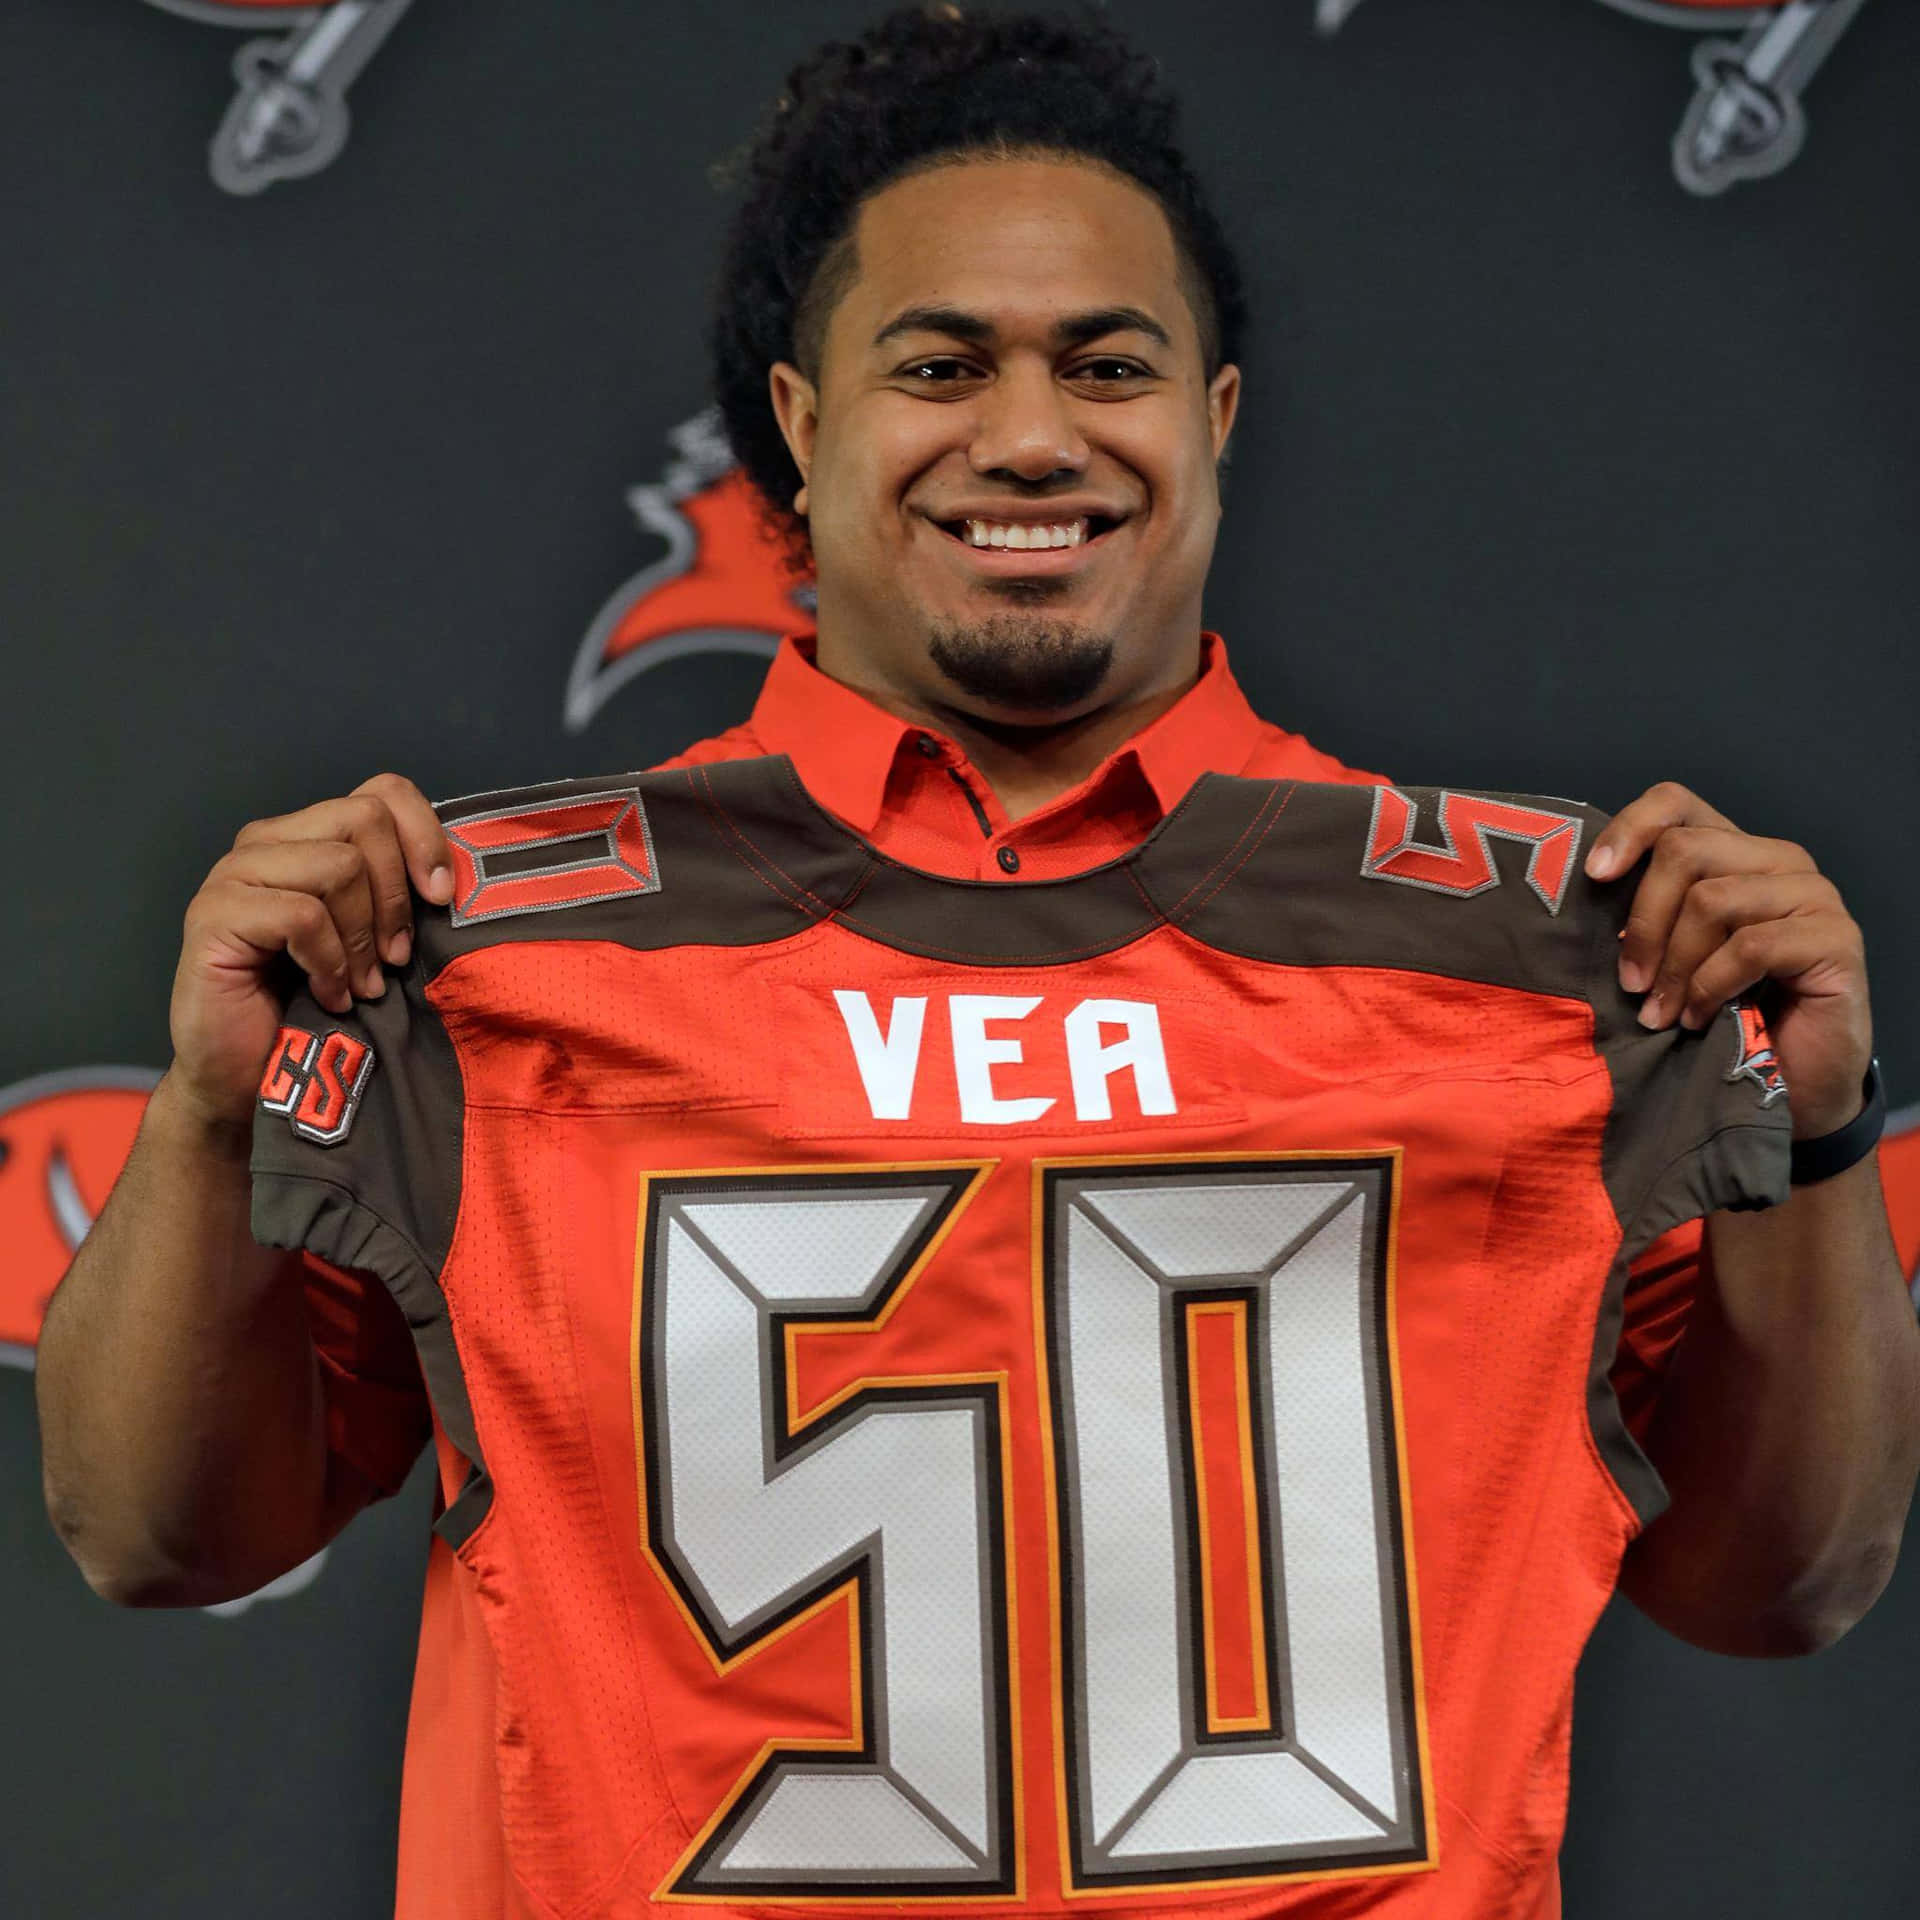 Football Player Holding Jersey Number50 Wallpaper